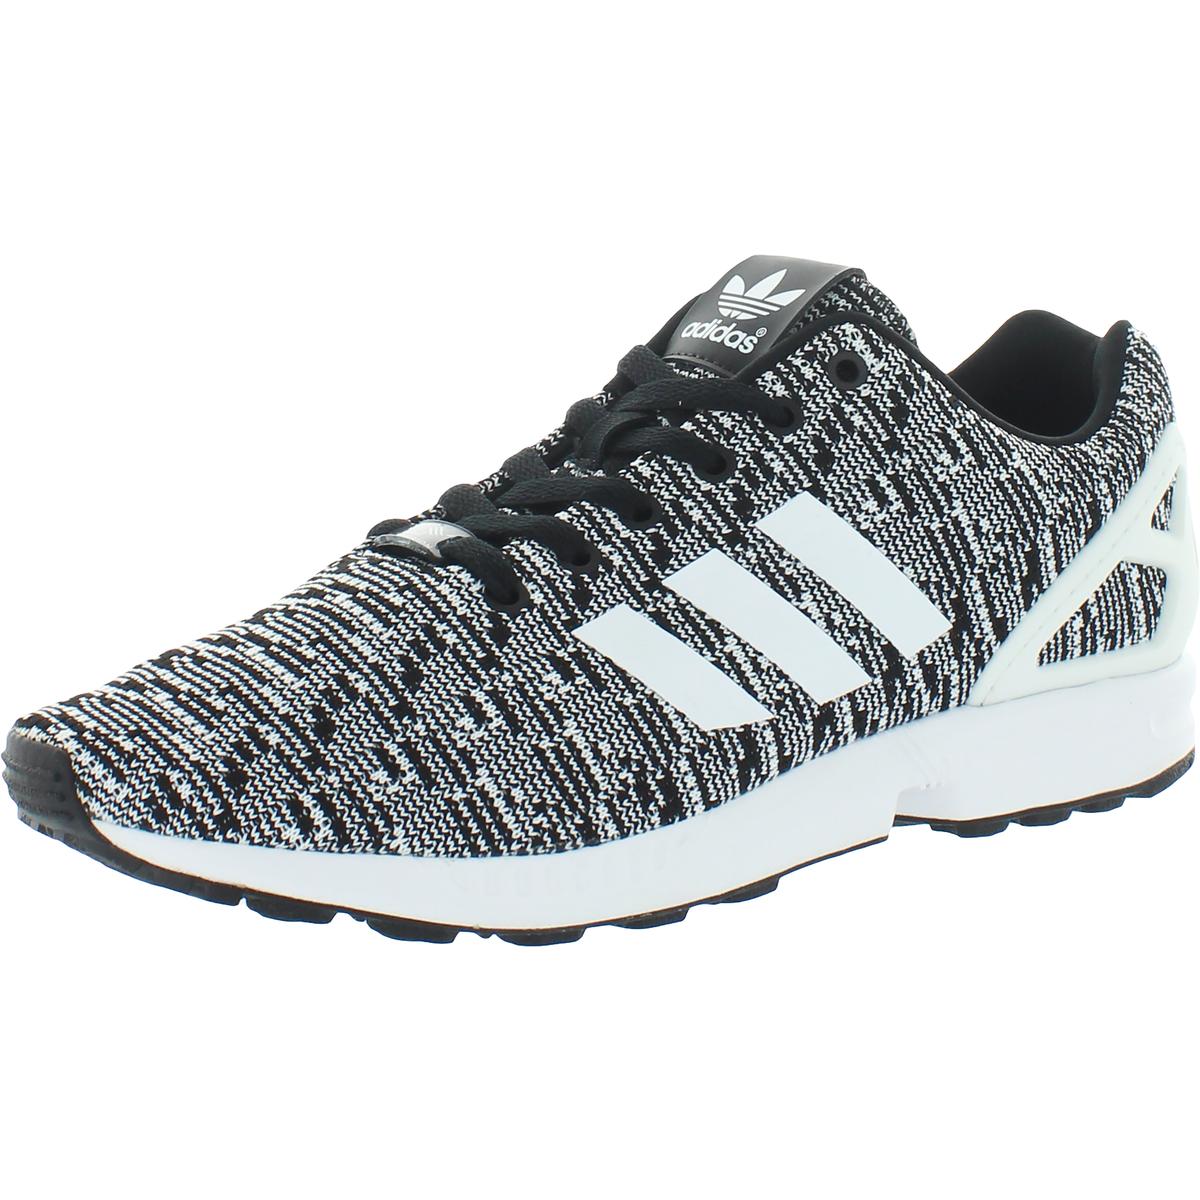 Zx Flux Mens Workout Performance Running Shoes